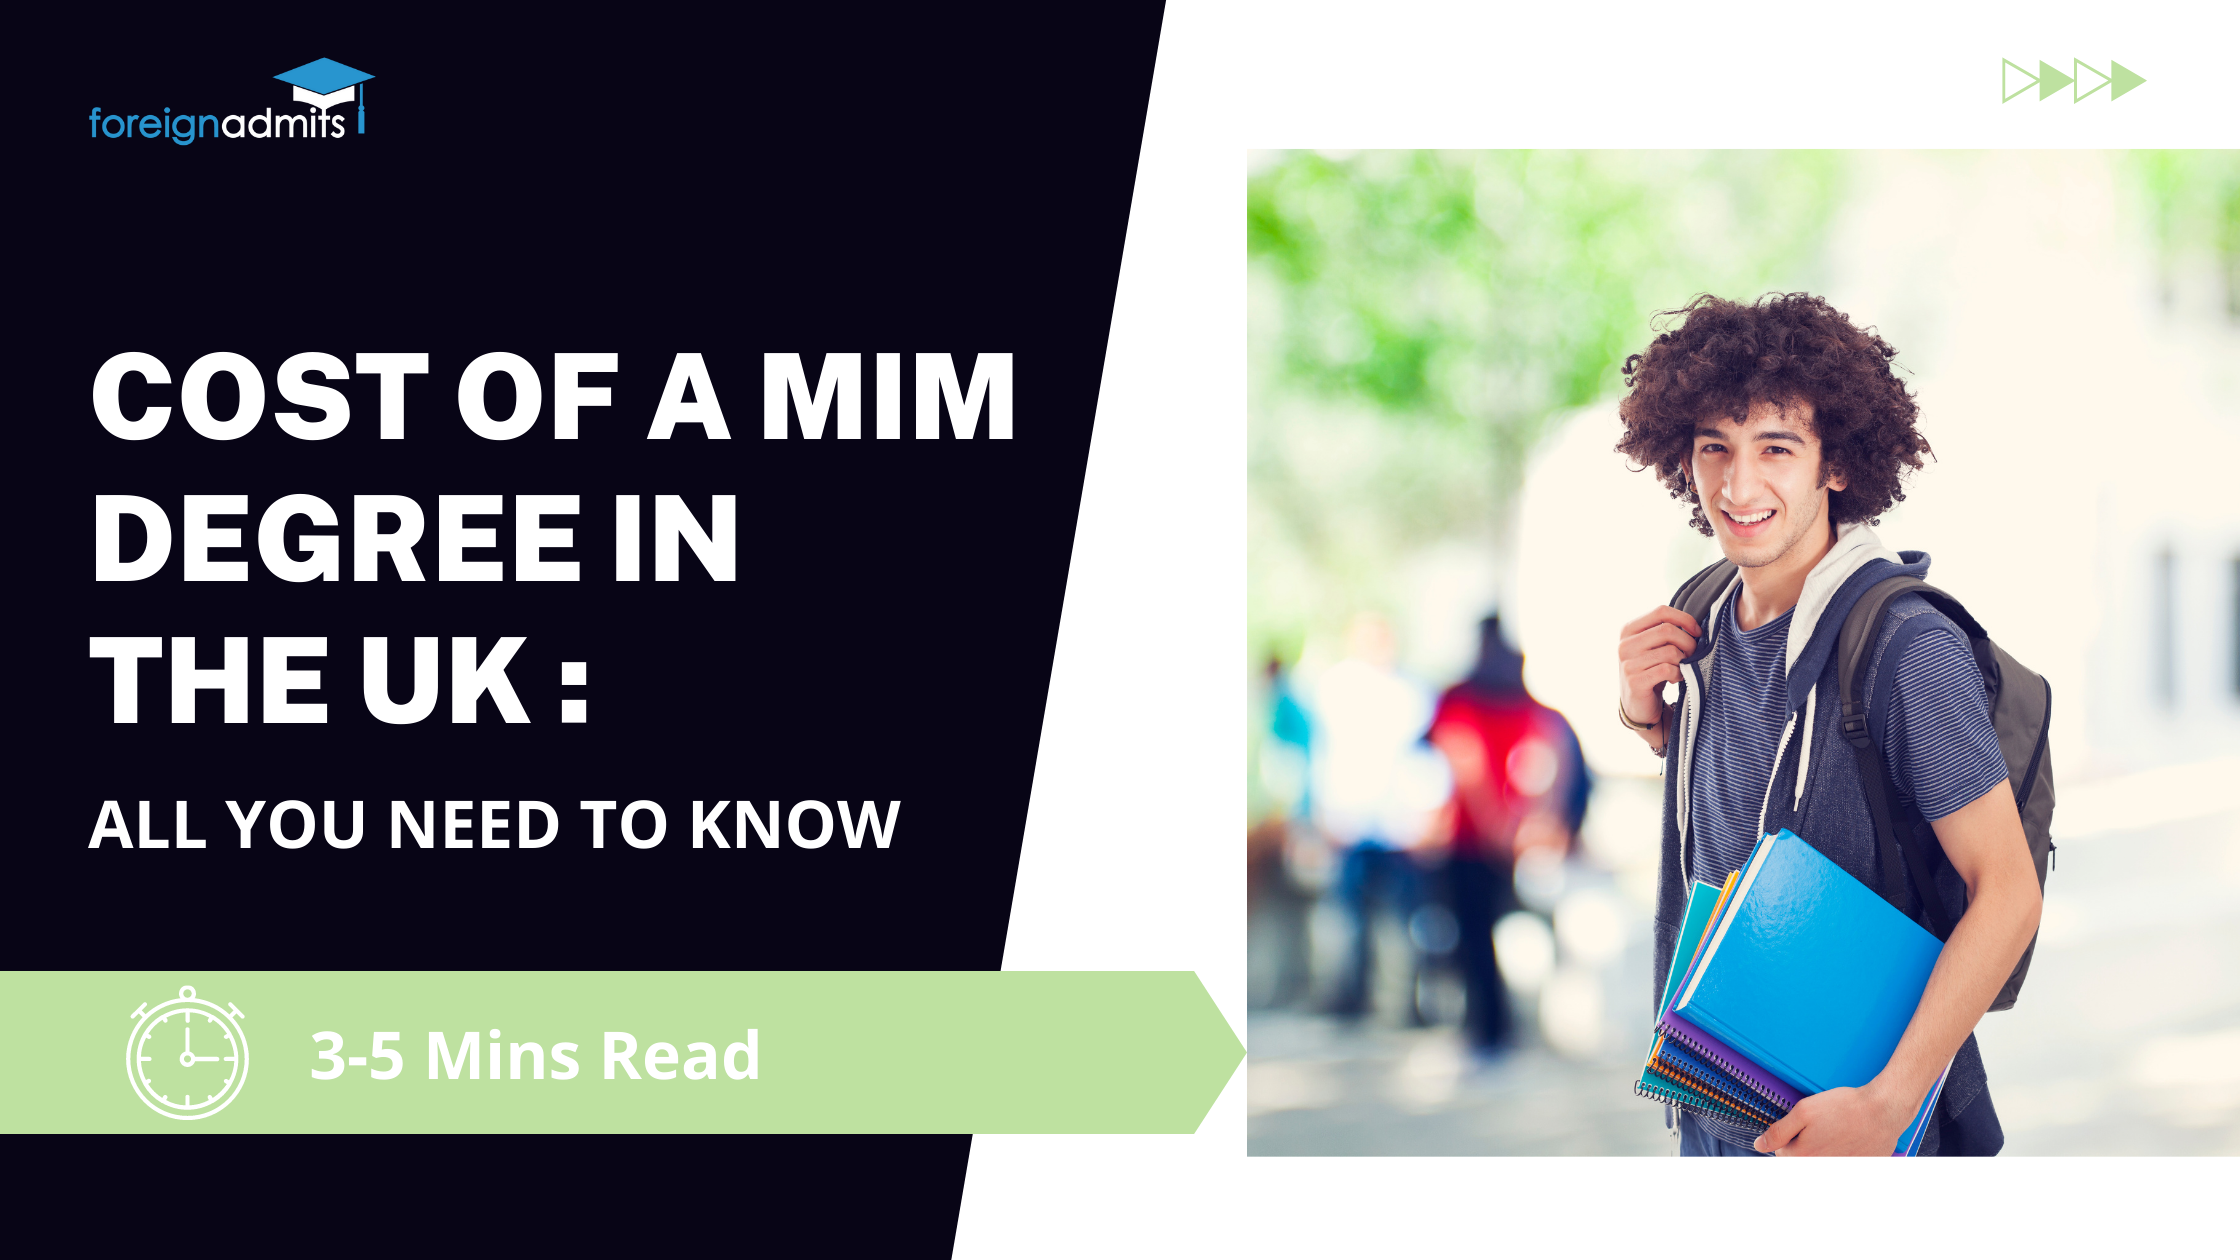 Cost of a MIM degree in the UK: All you need to know